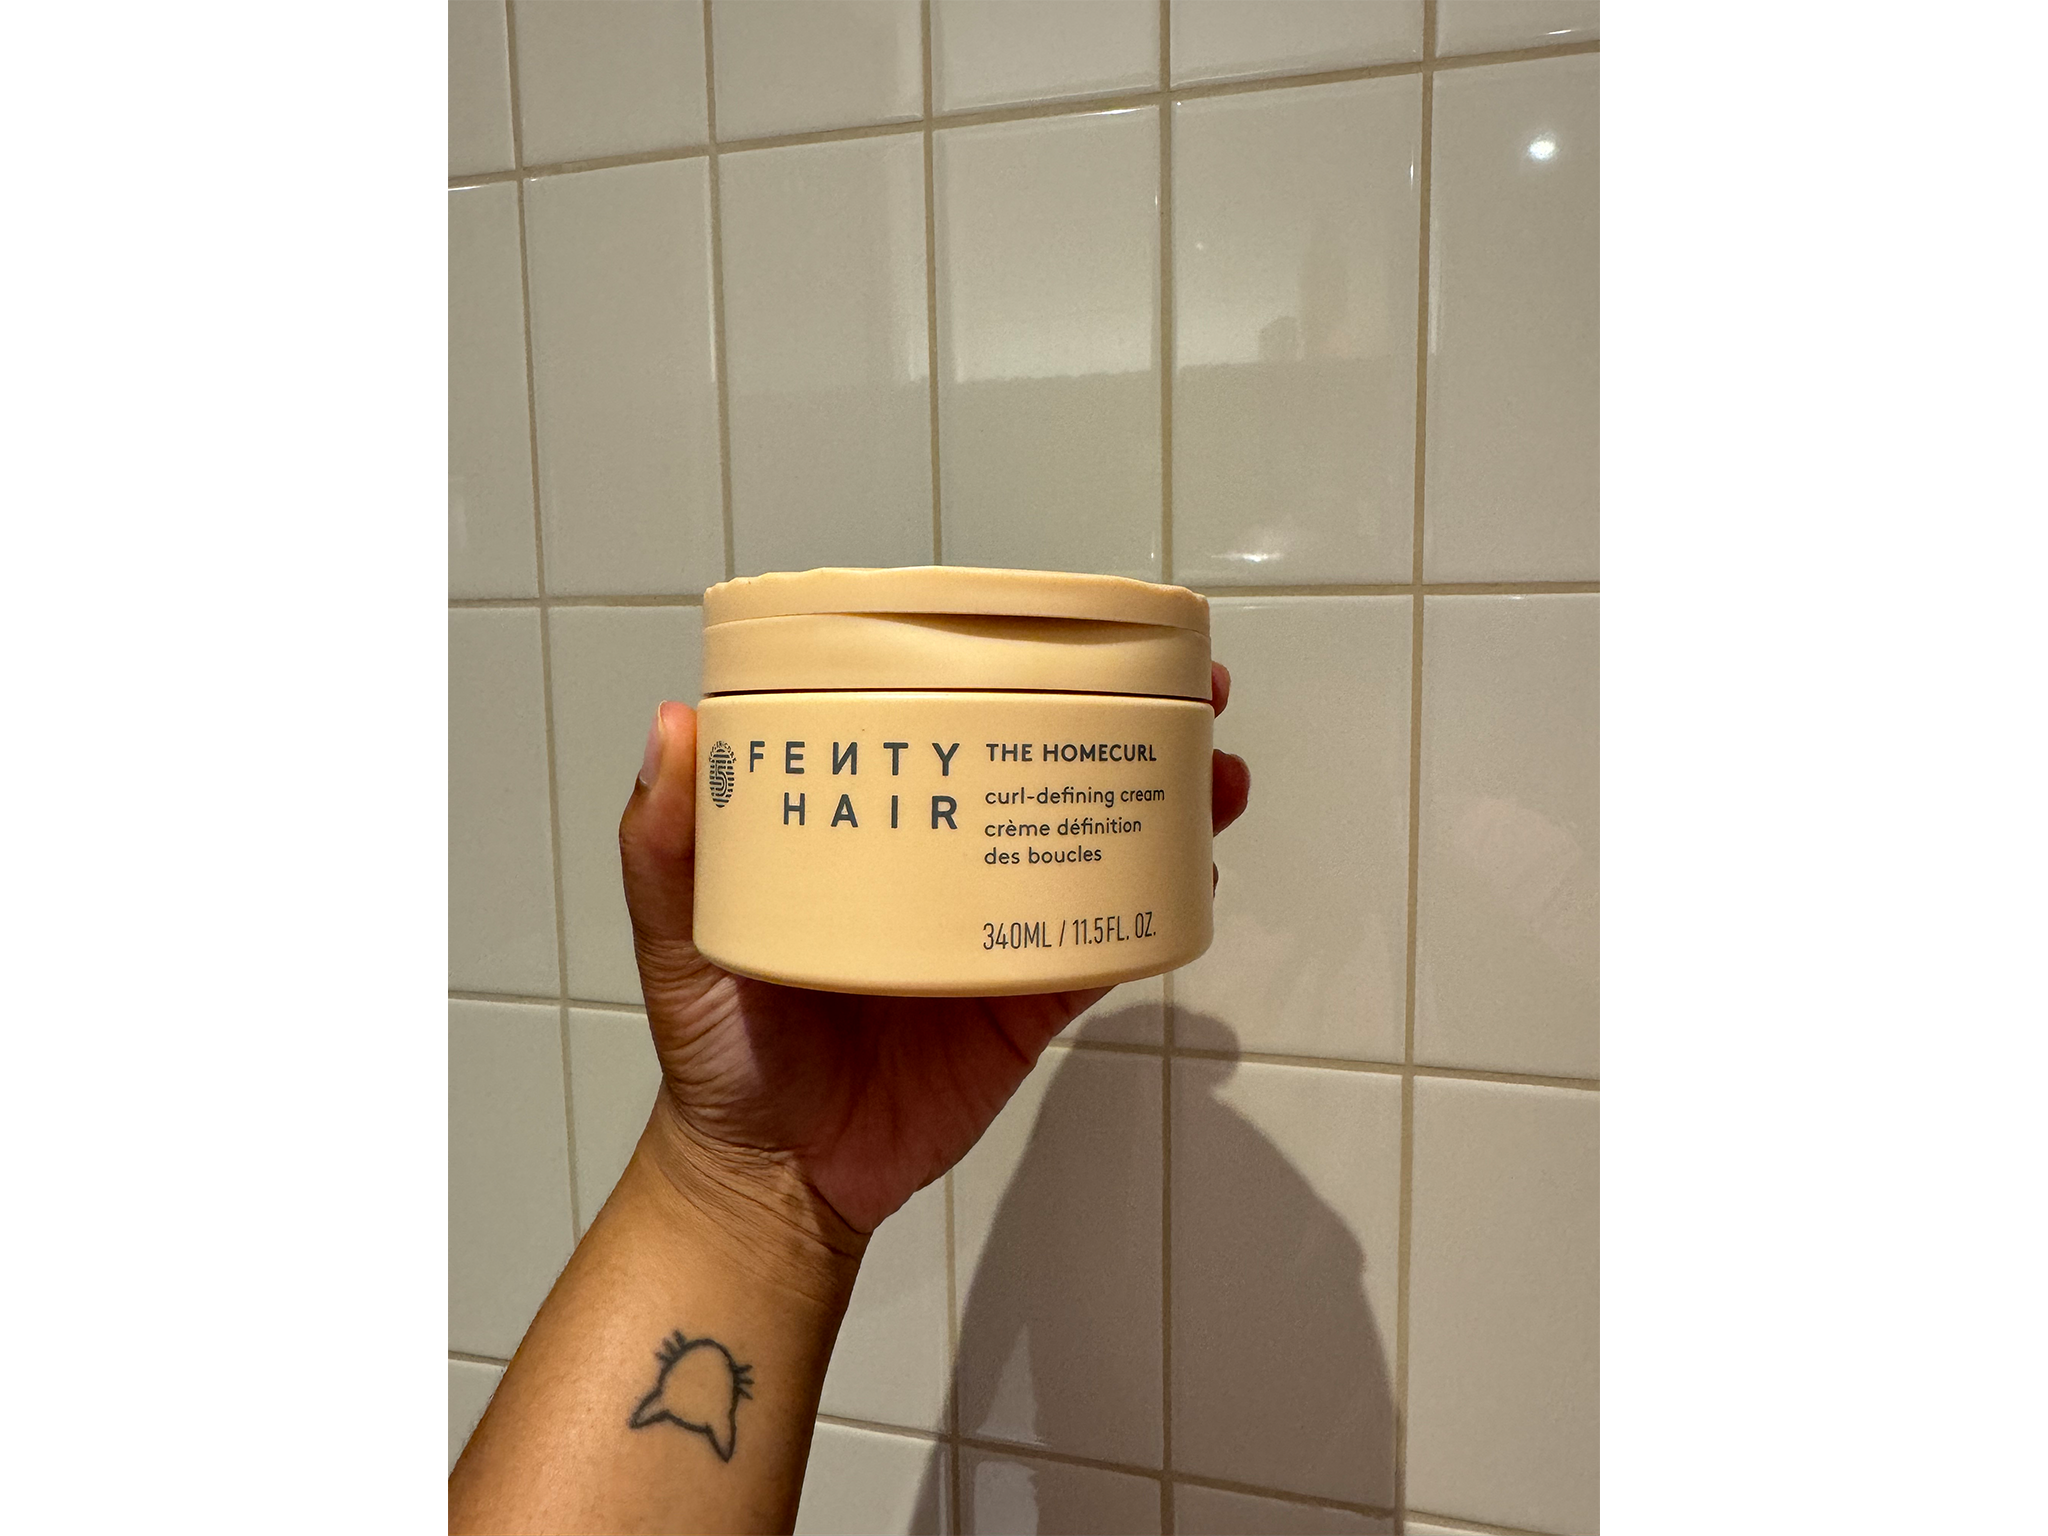 Fenty Hair indybest review Fenty Hair the homecurl curl-defining cream.